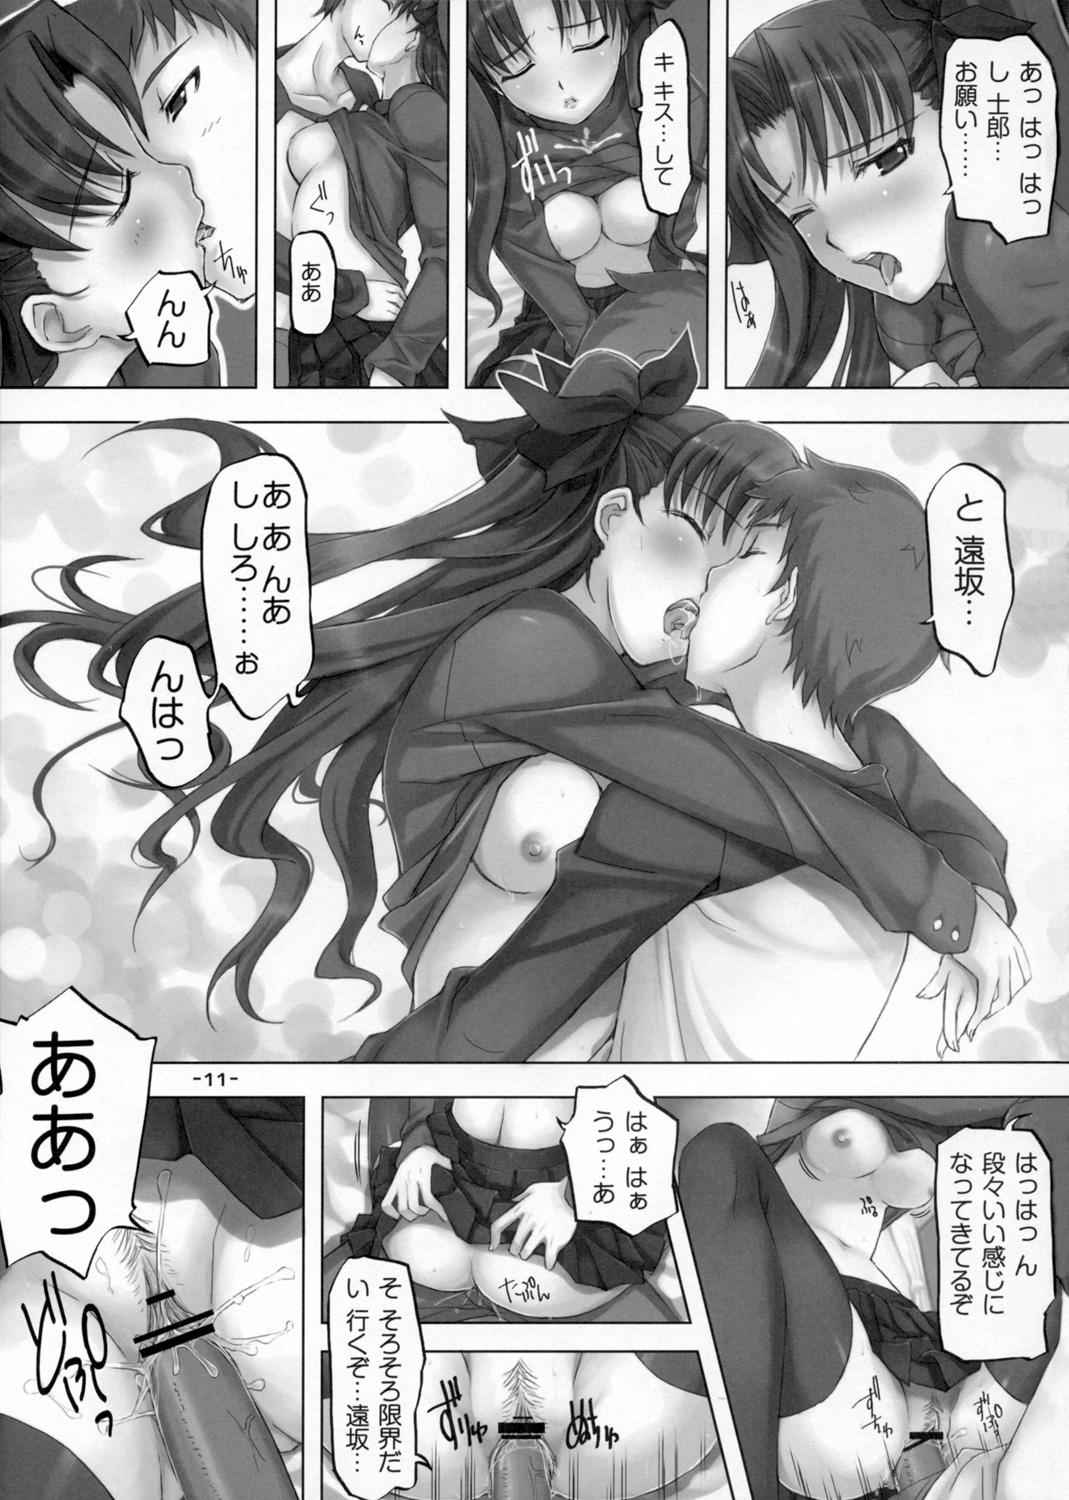 Family Taboo DAILY LIFE - Fate stay night Fate hollow ataraxia Maid - Page 10